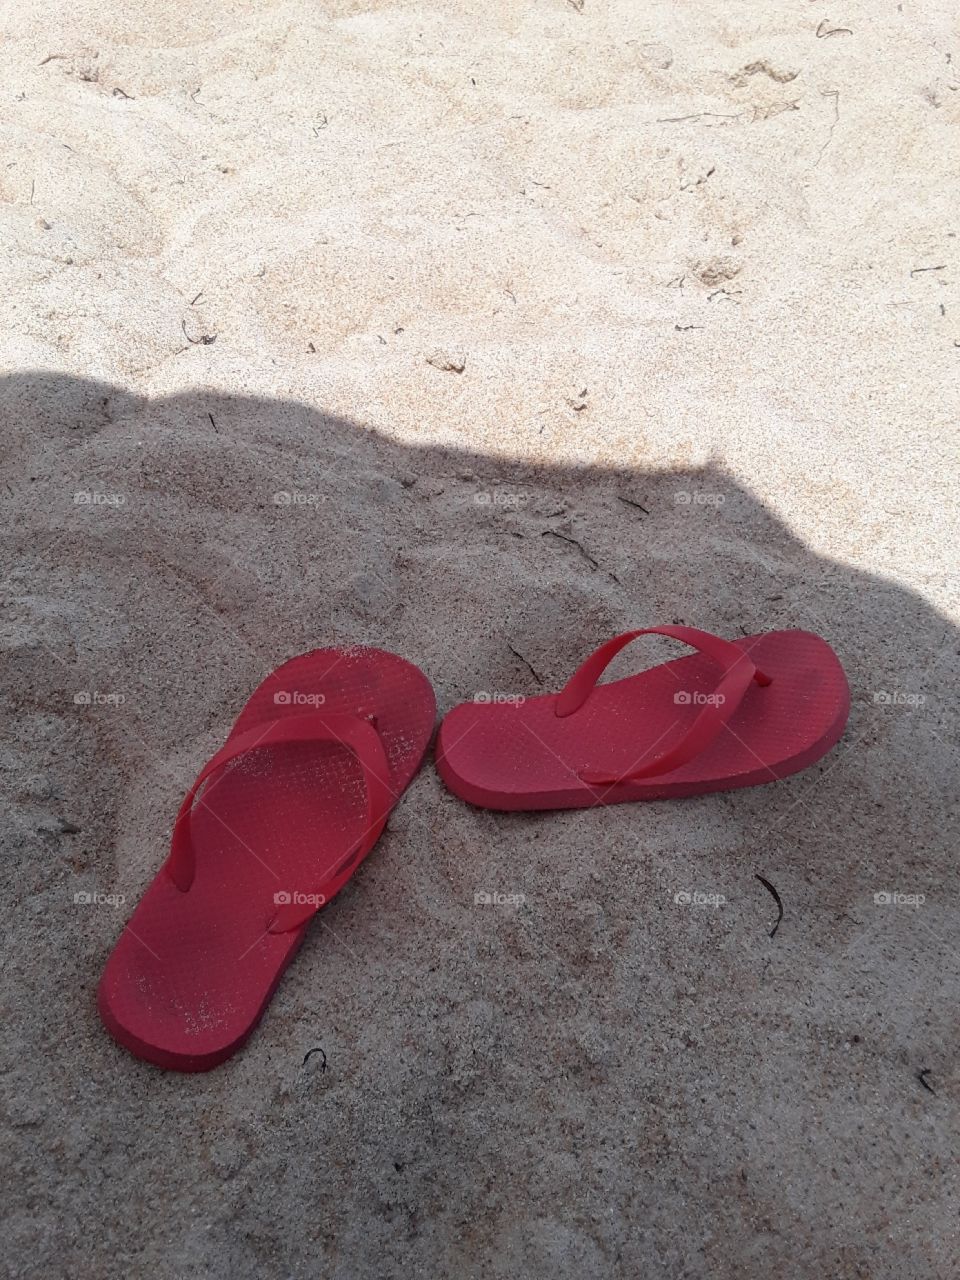 Red flip-flop and sandy beach.